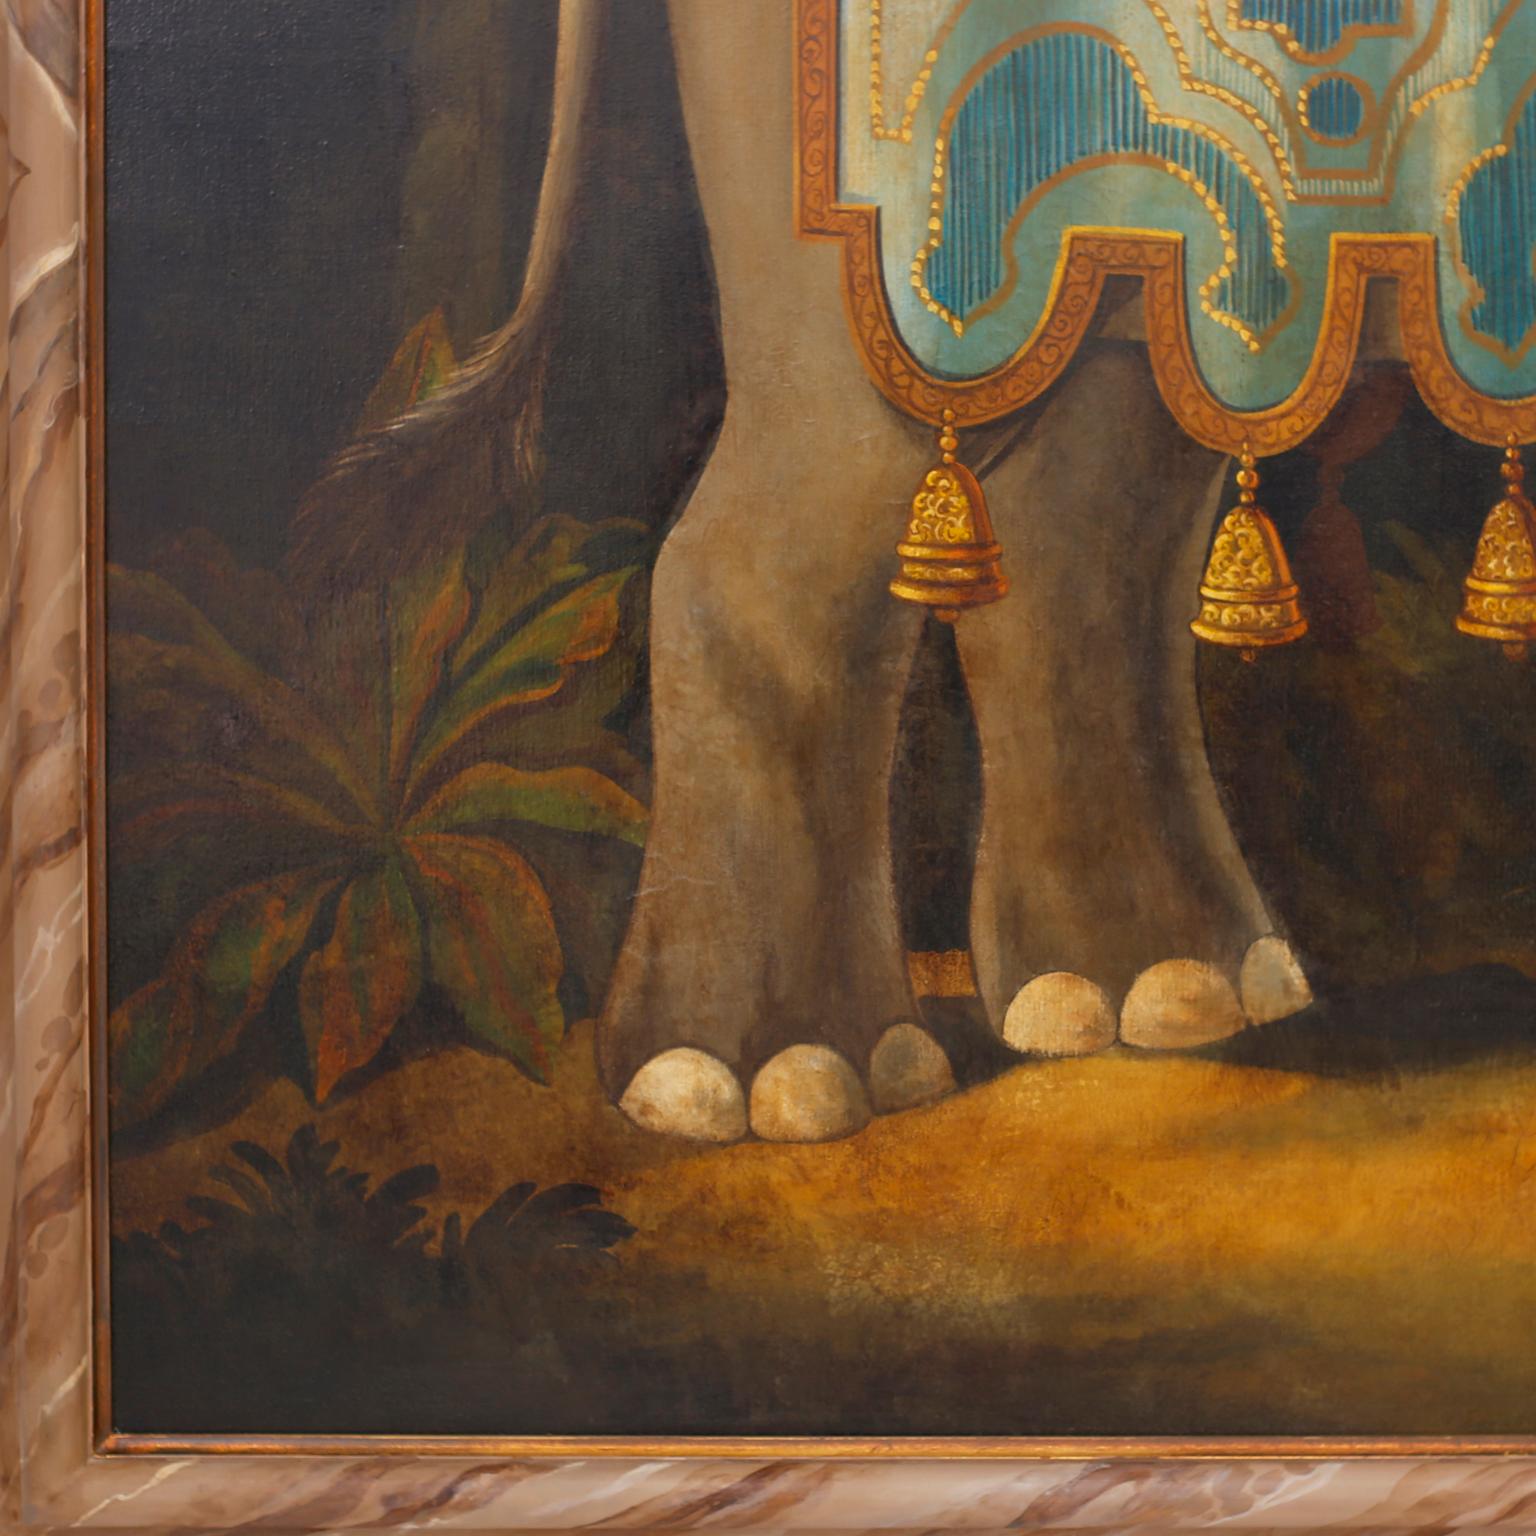 Oiled Oil Painting on Canvas of an Elephant by William Skilling